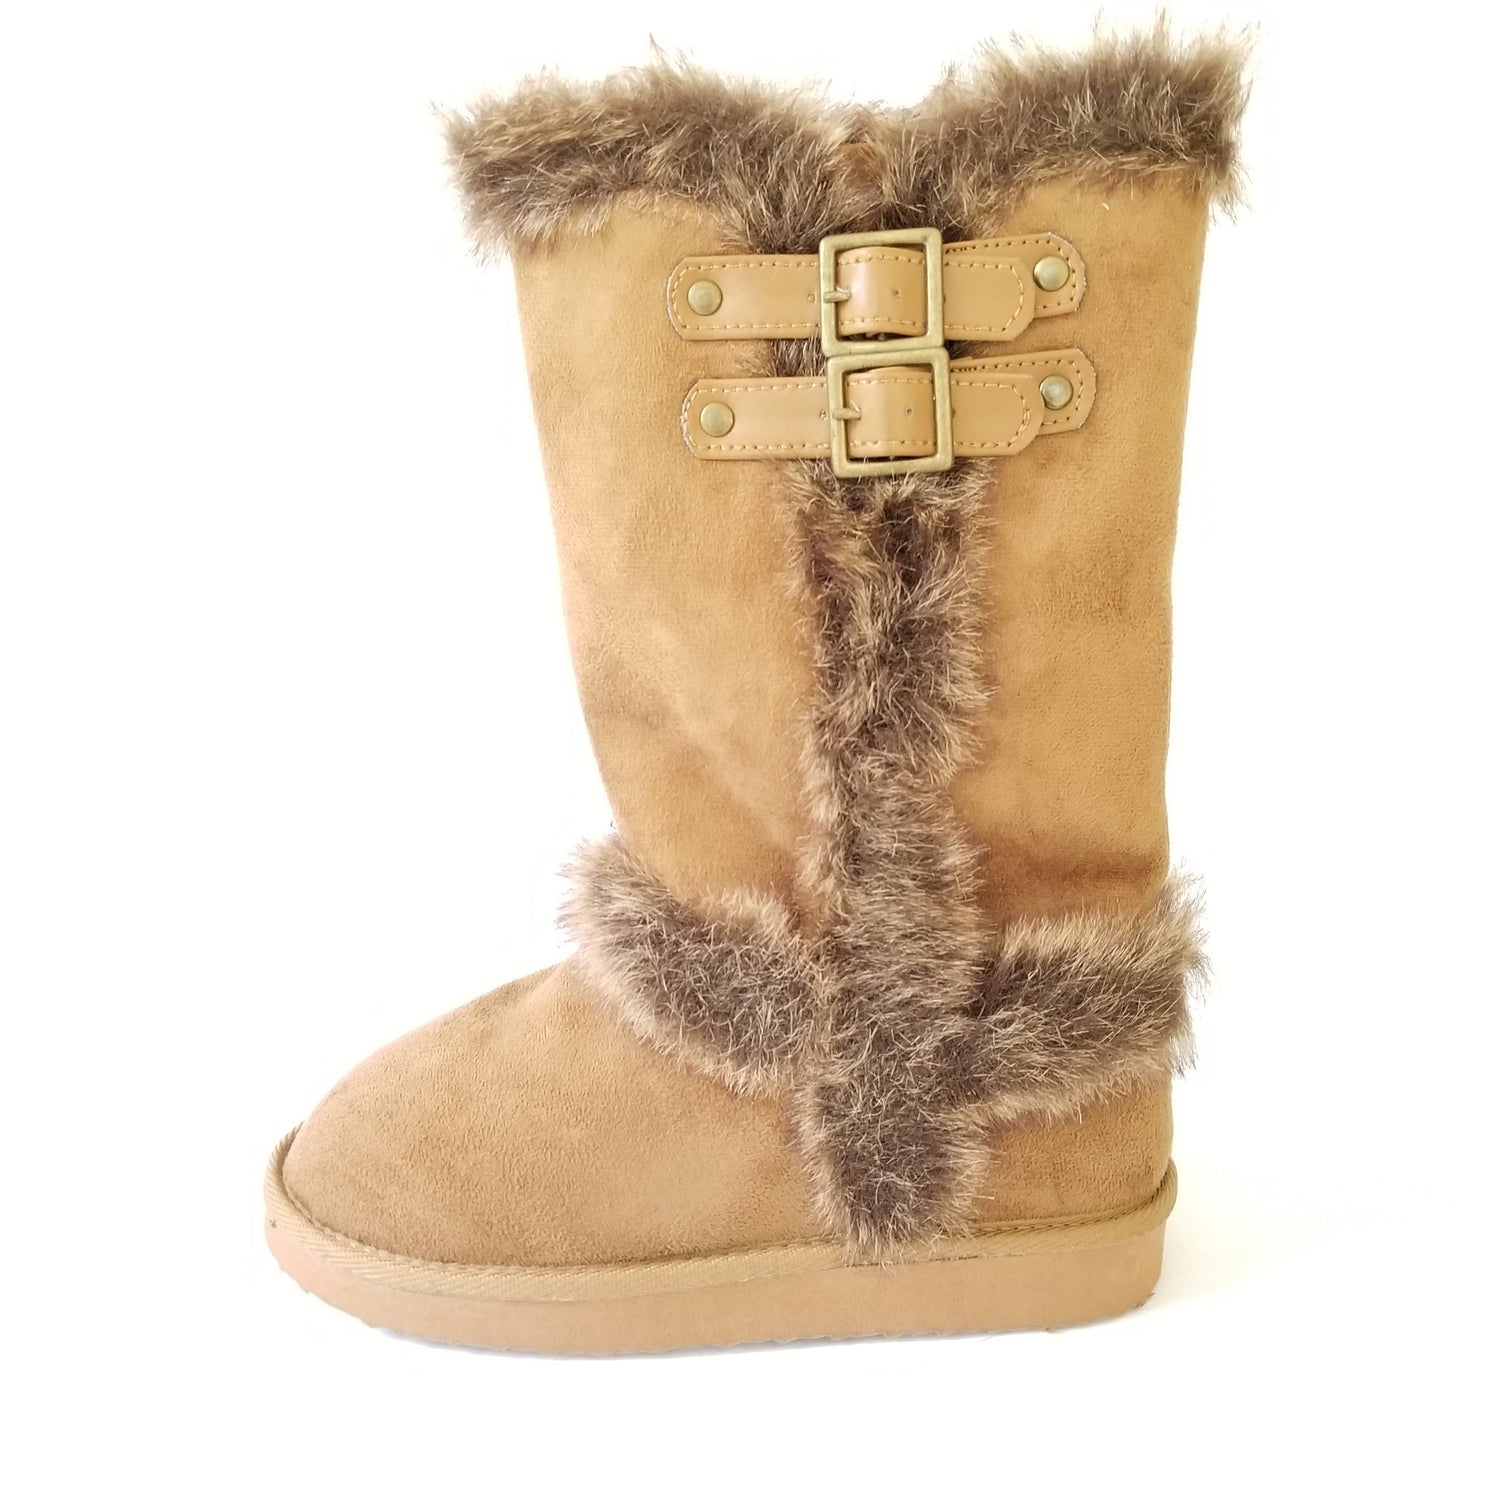 Annie Oakley Fur Lined Boots - Didi Royale